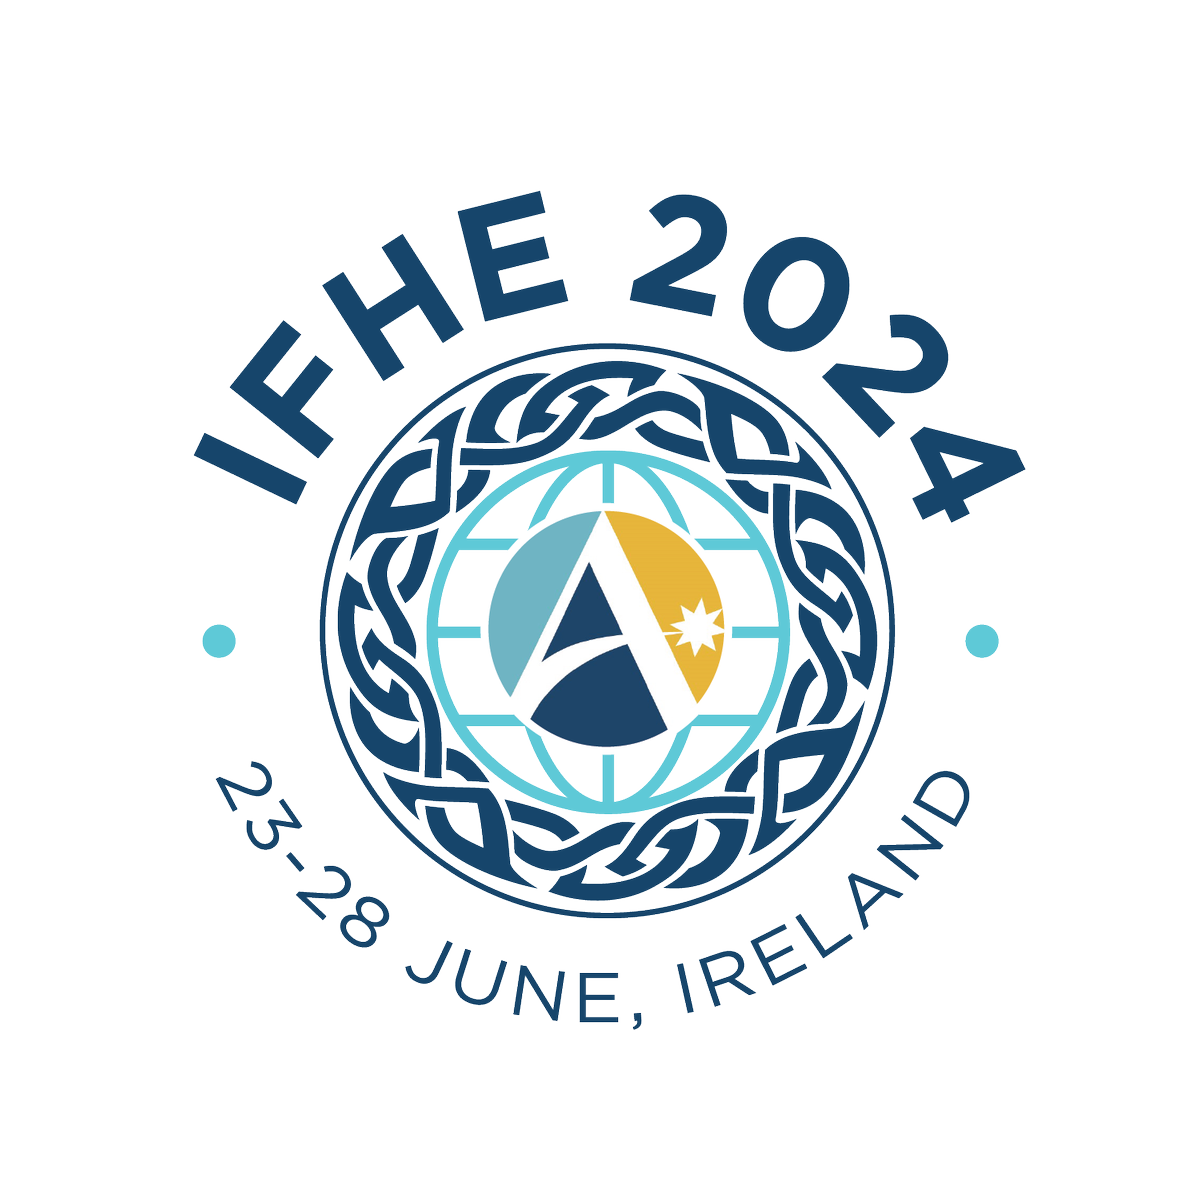 📢📢📢
The XXV World Congress of the @IFHE_HomeEc takes place in July 2024, hosted by our National Centre of Excellence for #HomeEconomics, with the event itself taking place in the beautiful City of the Tribes #Galway

ℹ️ 👉ifhe2024.com
#CallForAbstractsOpen